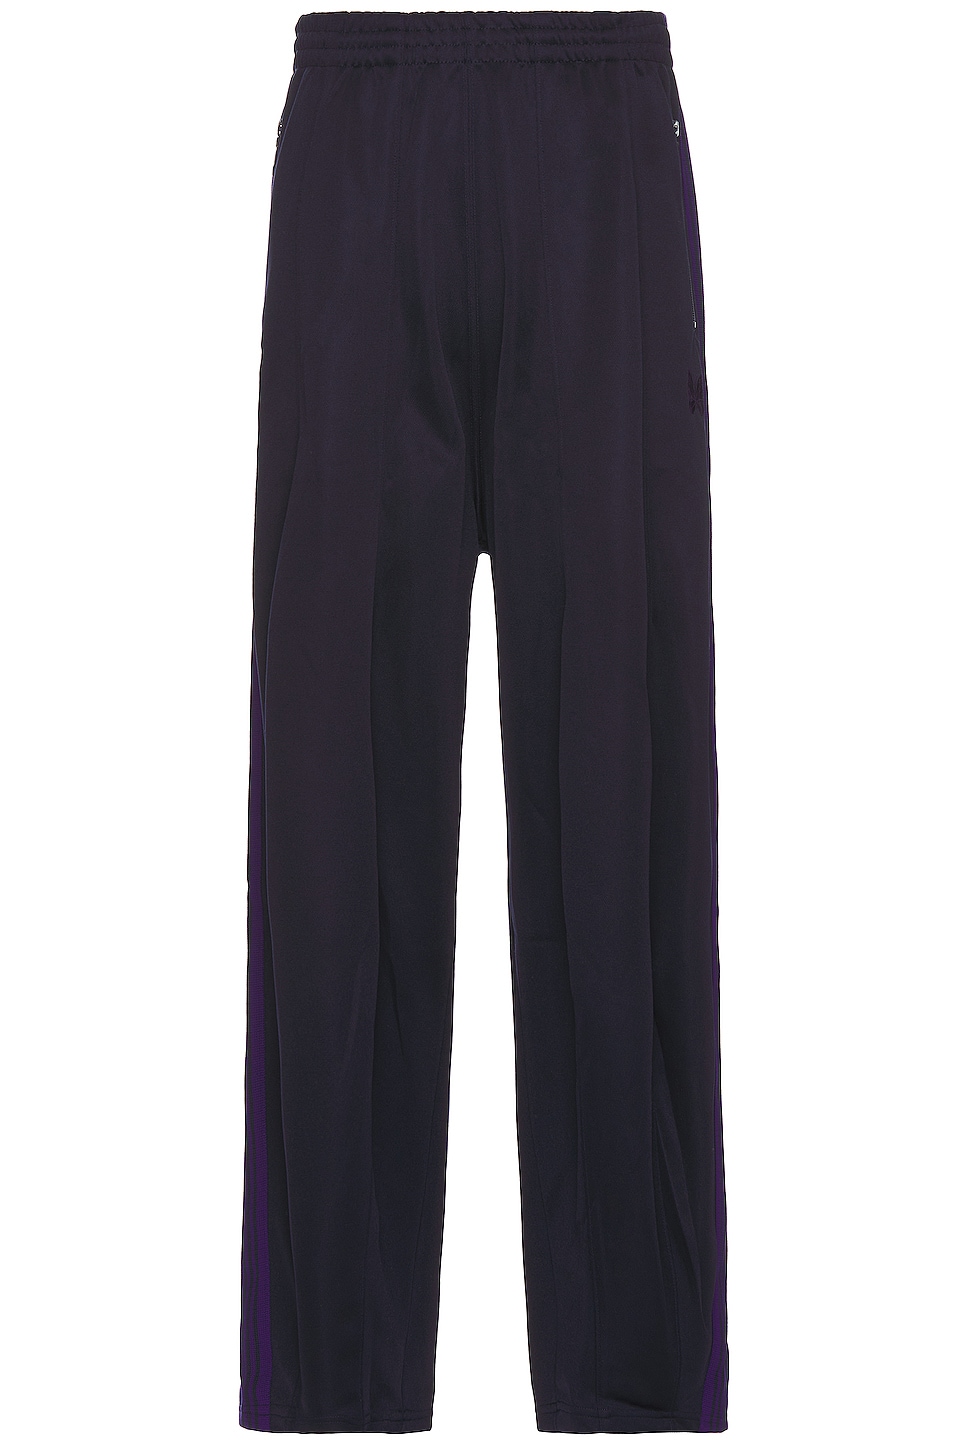 Image 1 of Needles H.d. Track Pant in Navy